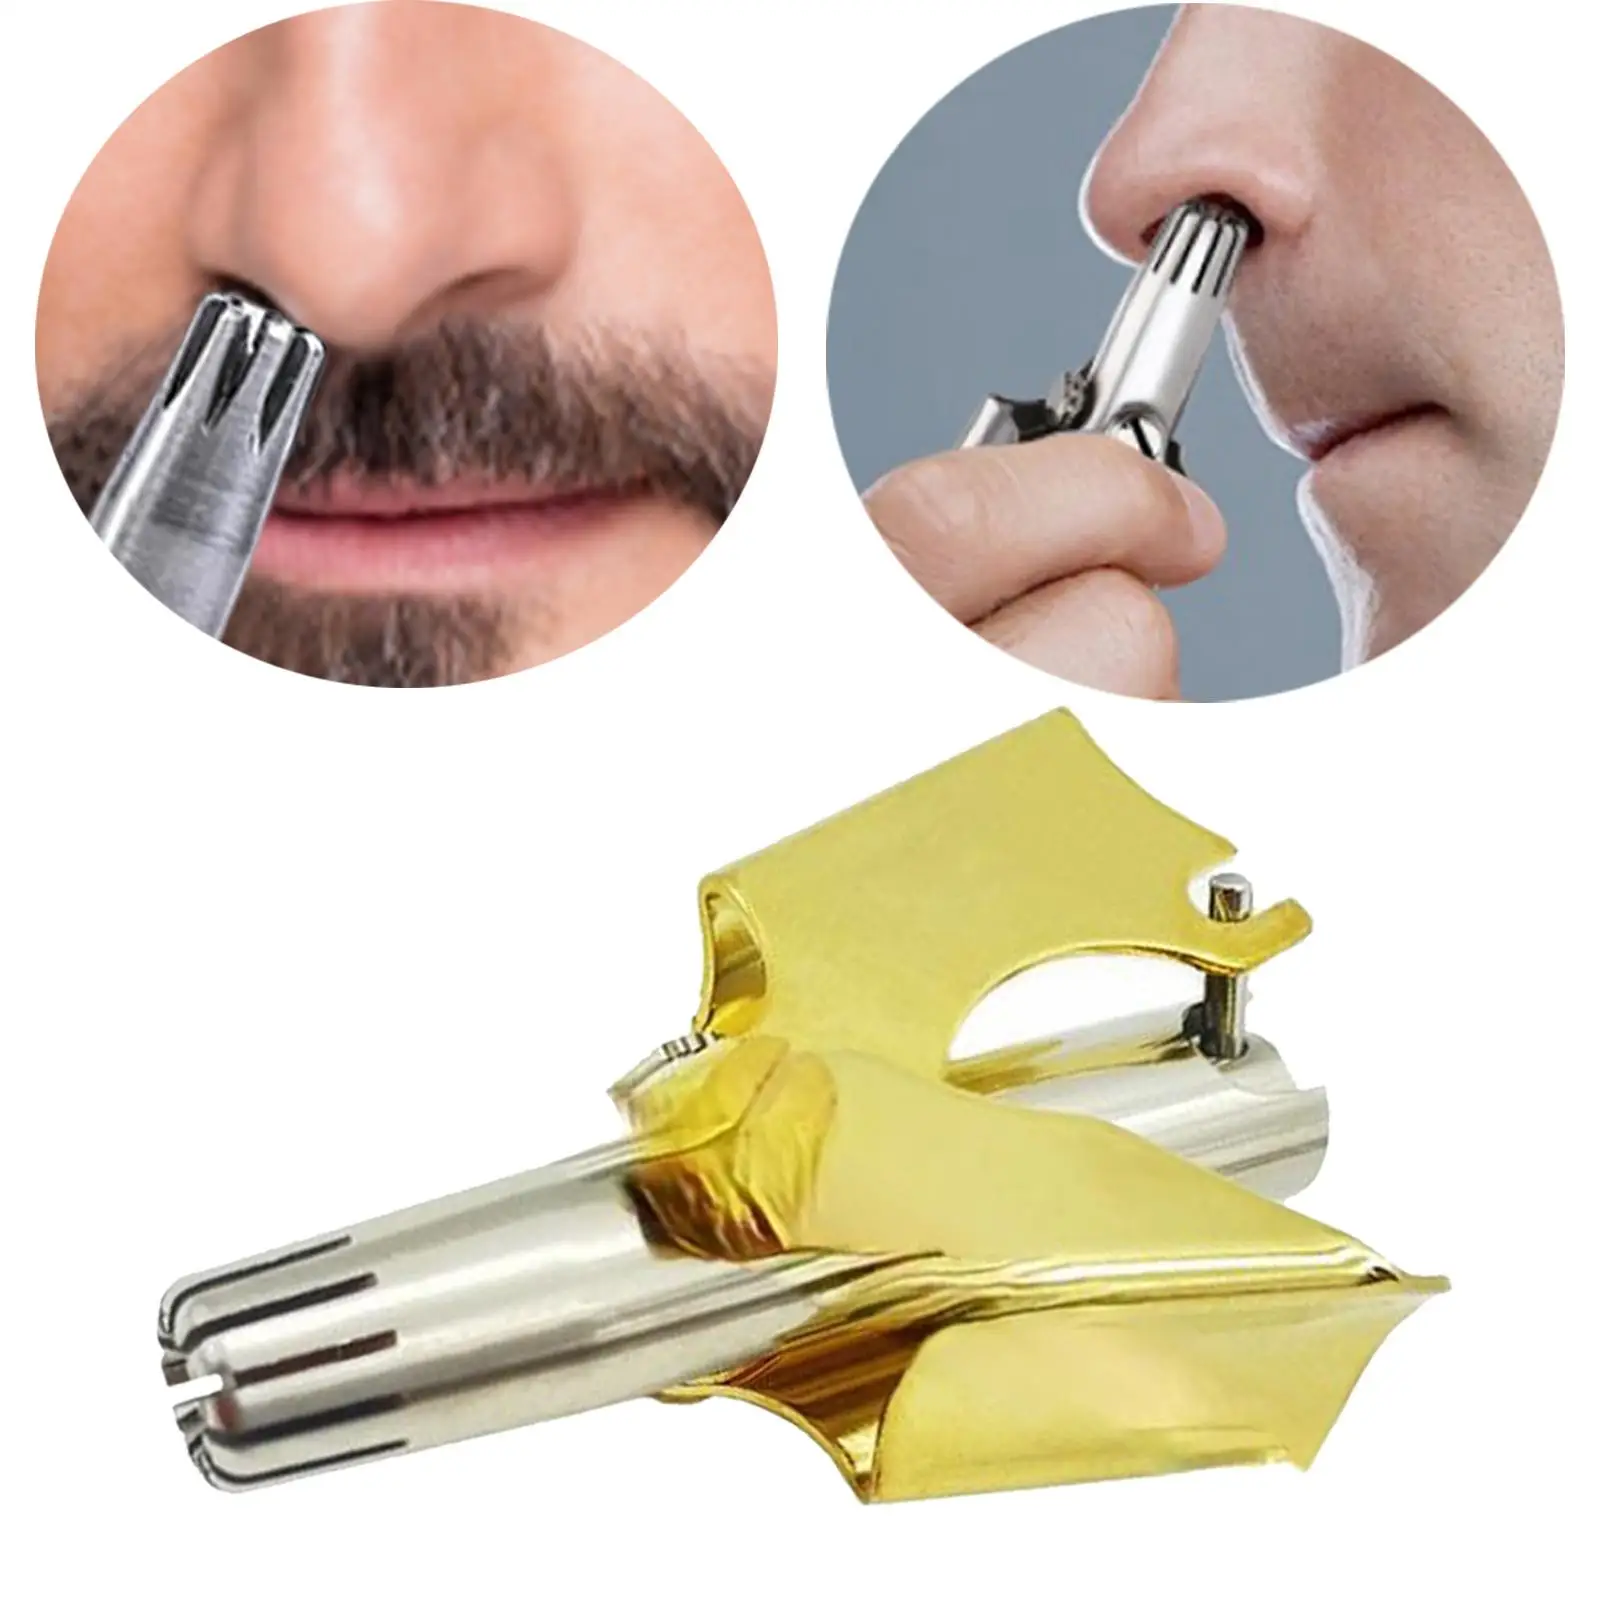 Mini Manual Nose Trimmer Washable Stainless Steel Razor Shaver No Battery for Men Low Manual Noise Ear Hair Cutter Silver Gold